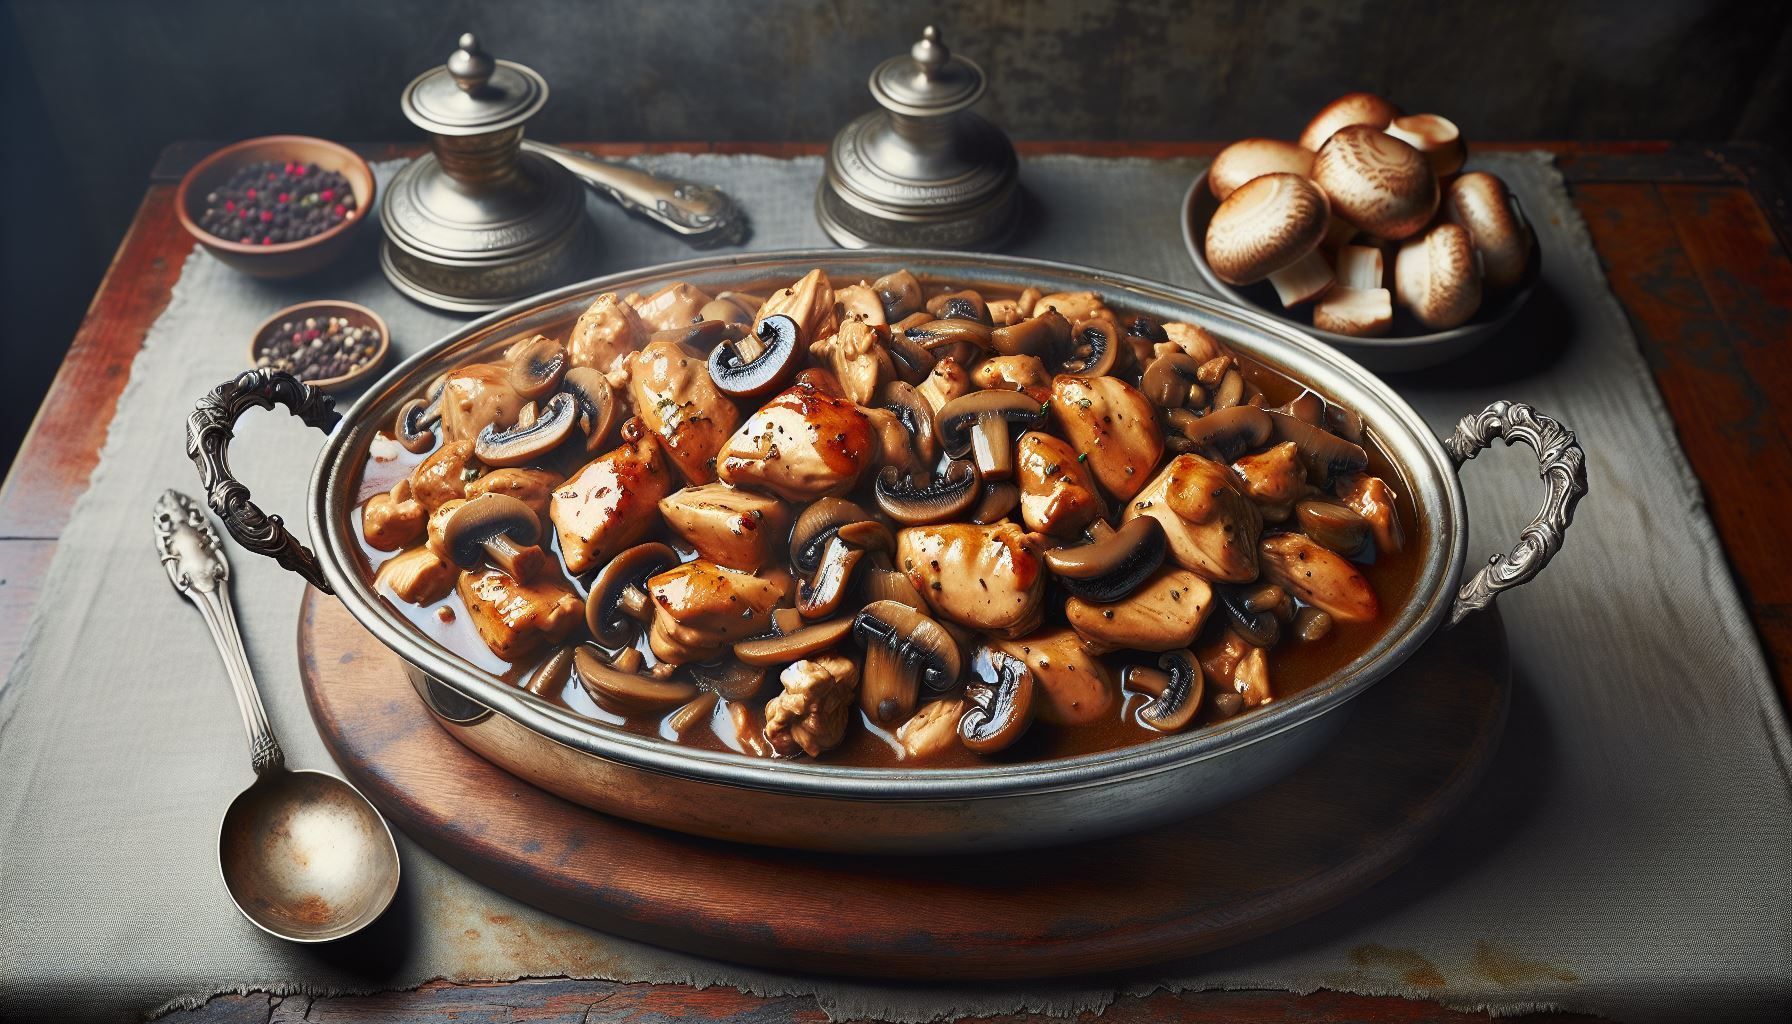 A bowl of chicken and mushroom stew on a wooden table.